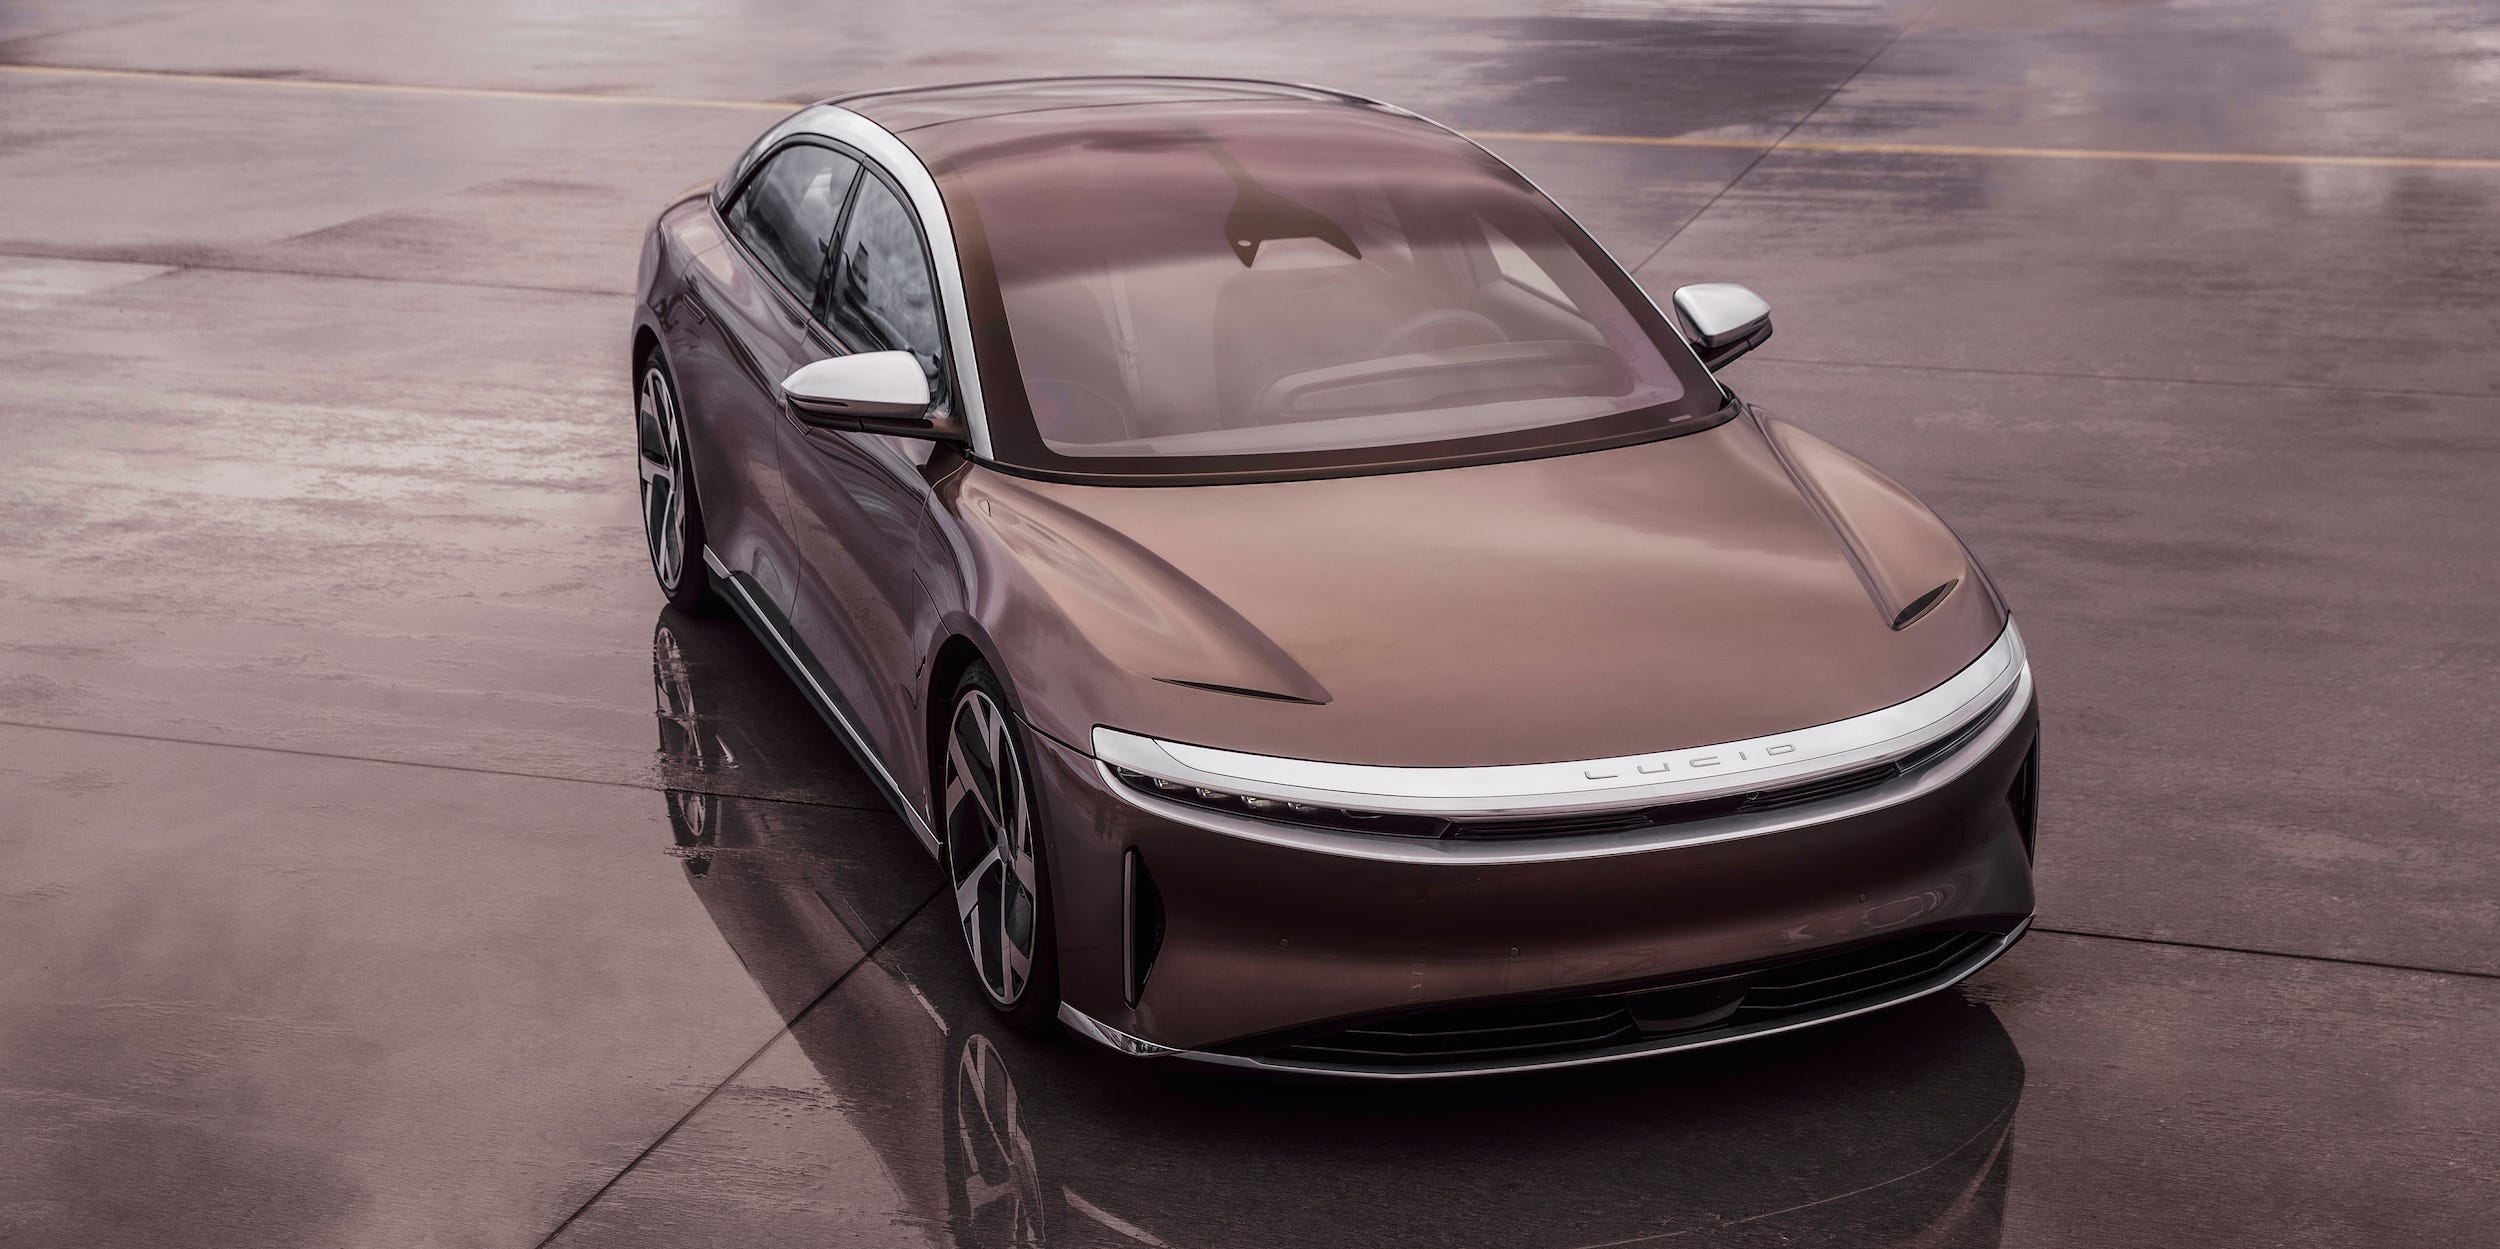 Lucid Motors just unveiled a new EV that starts at $80,000 and can beat a Tesla Model S on paper — check out the Air